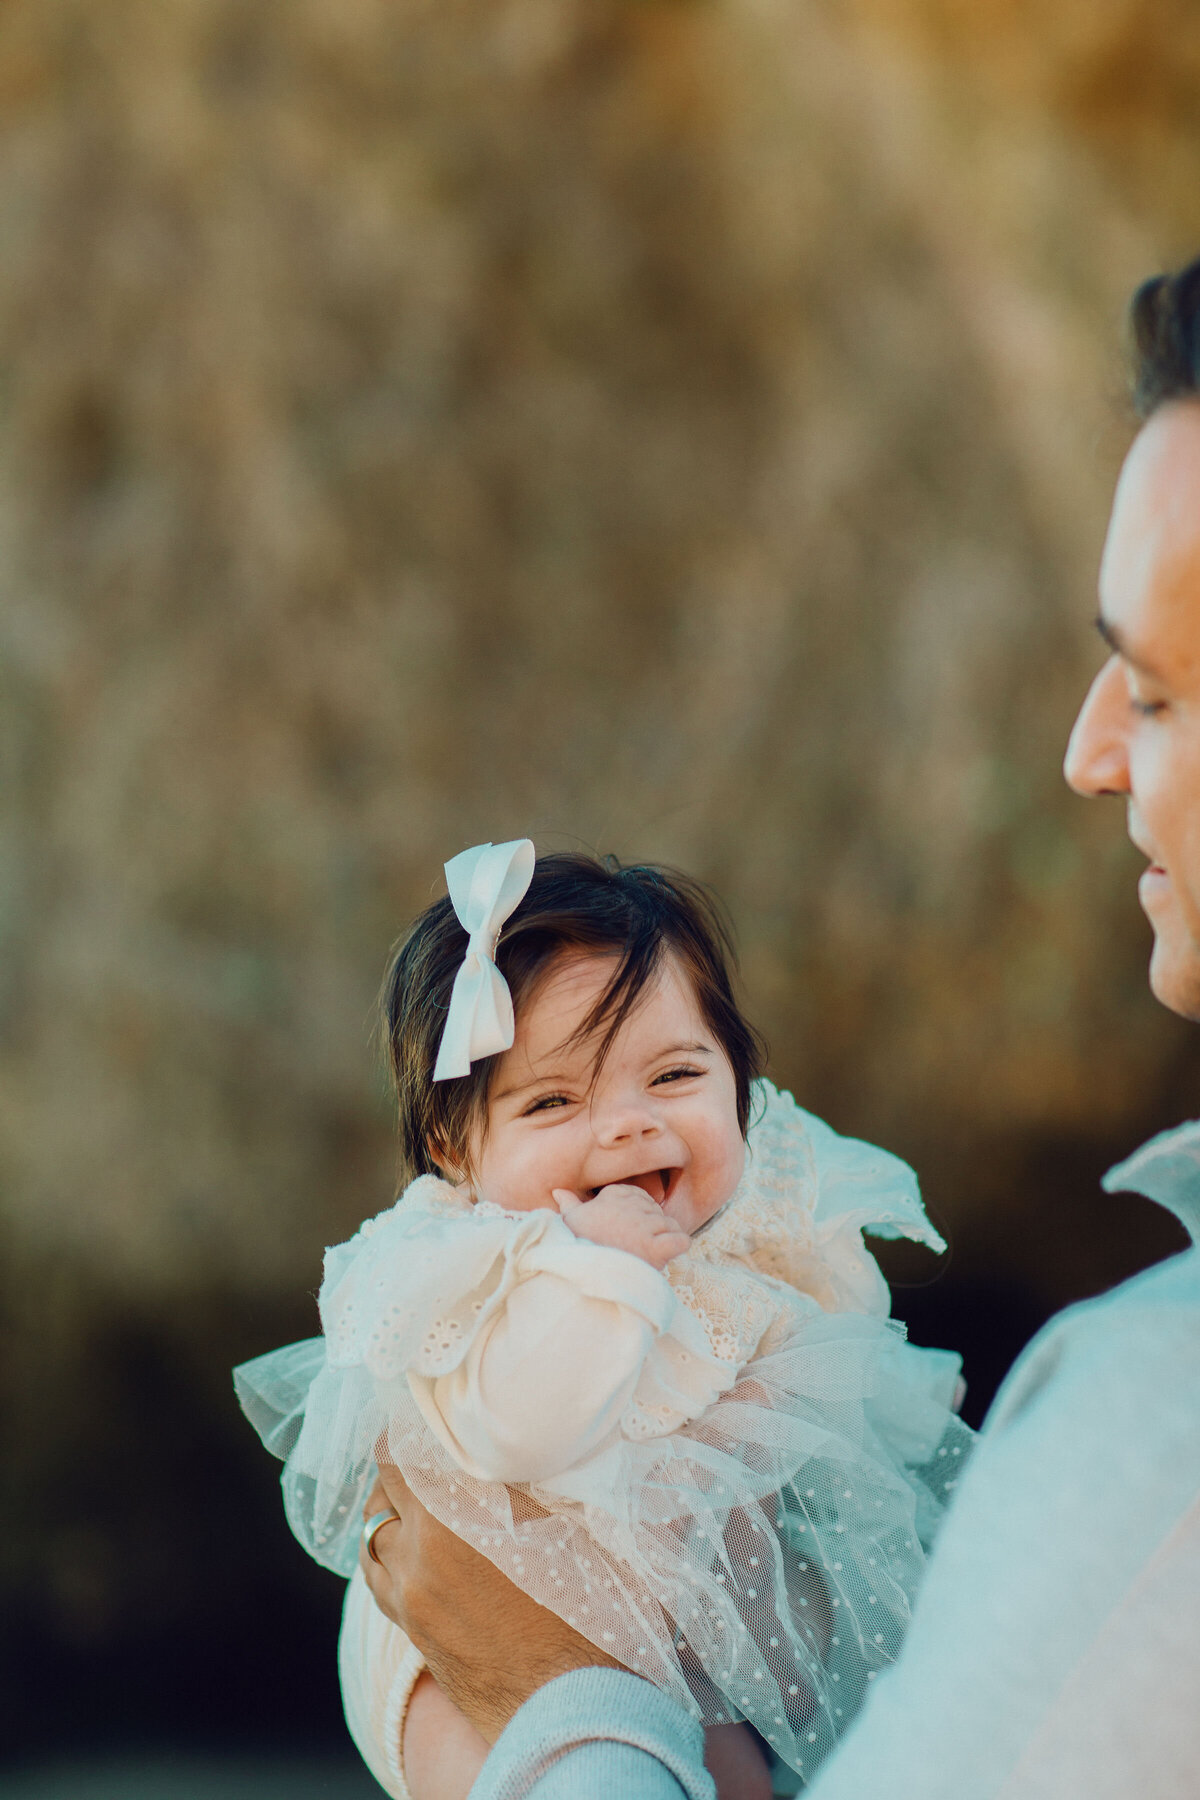 Family Portrait Photo Of Baby In White Dress Los Angeles